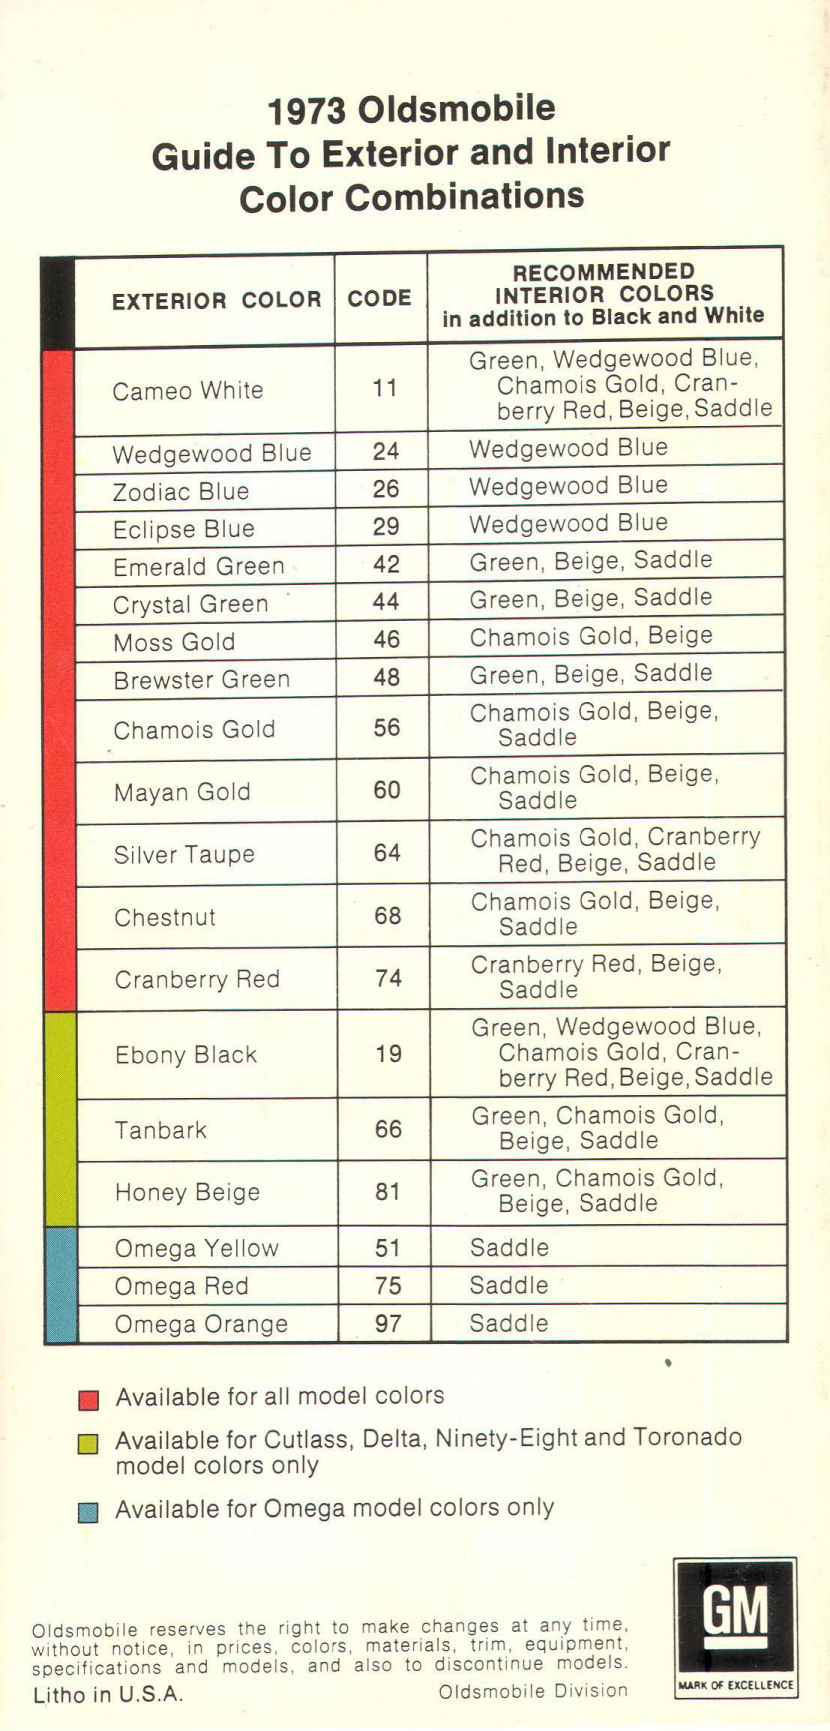 1973_Oldsmobile_Exterior_Colors_Guide-04